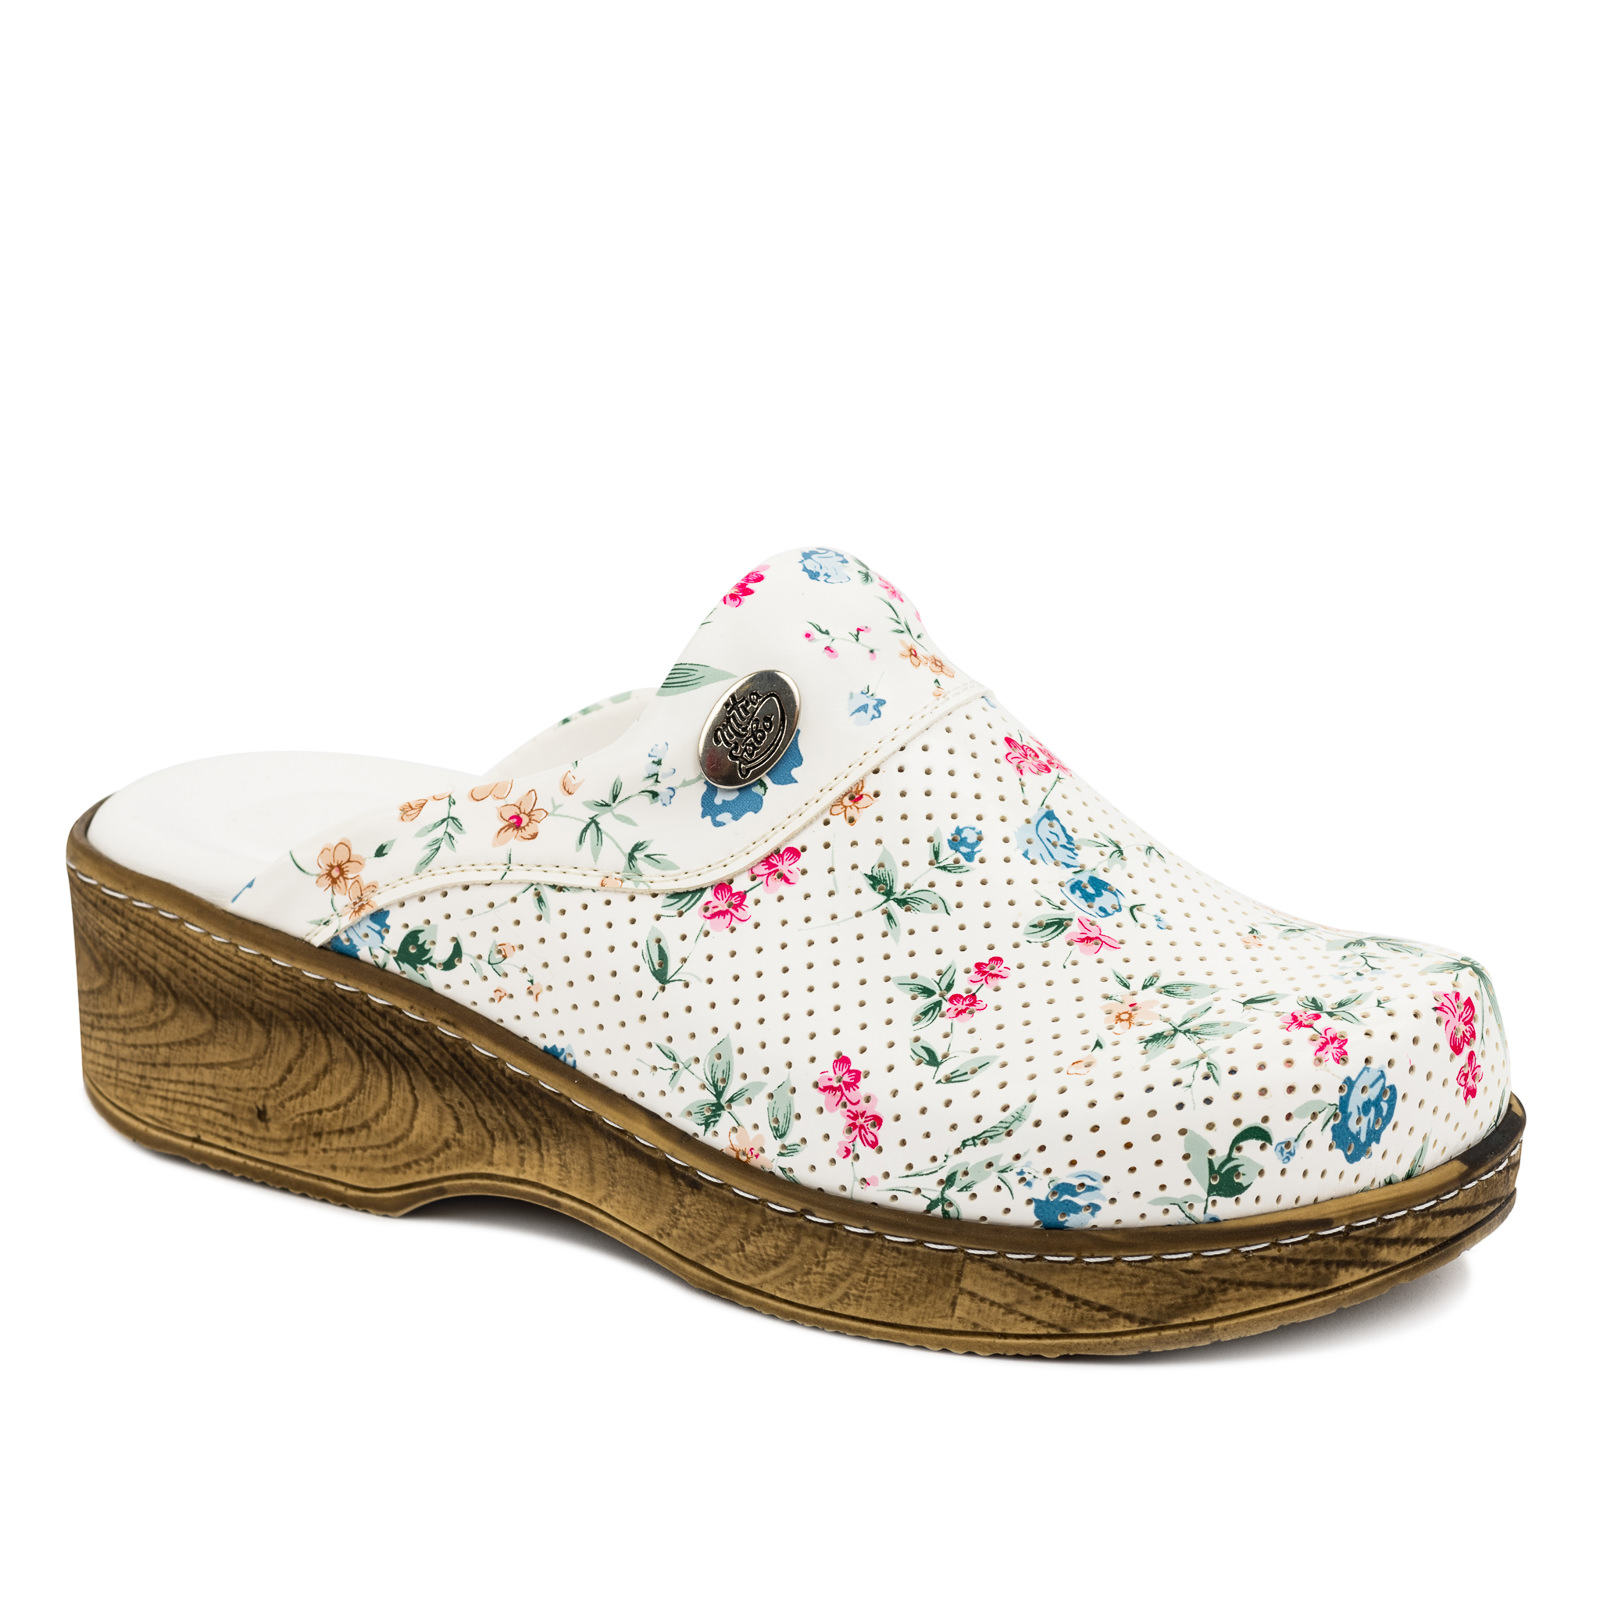 Patterned women clogs A043 - FLORAL - WHITE